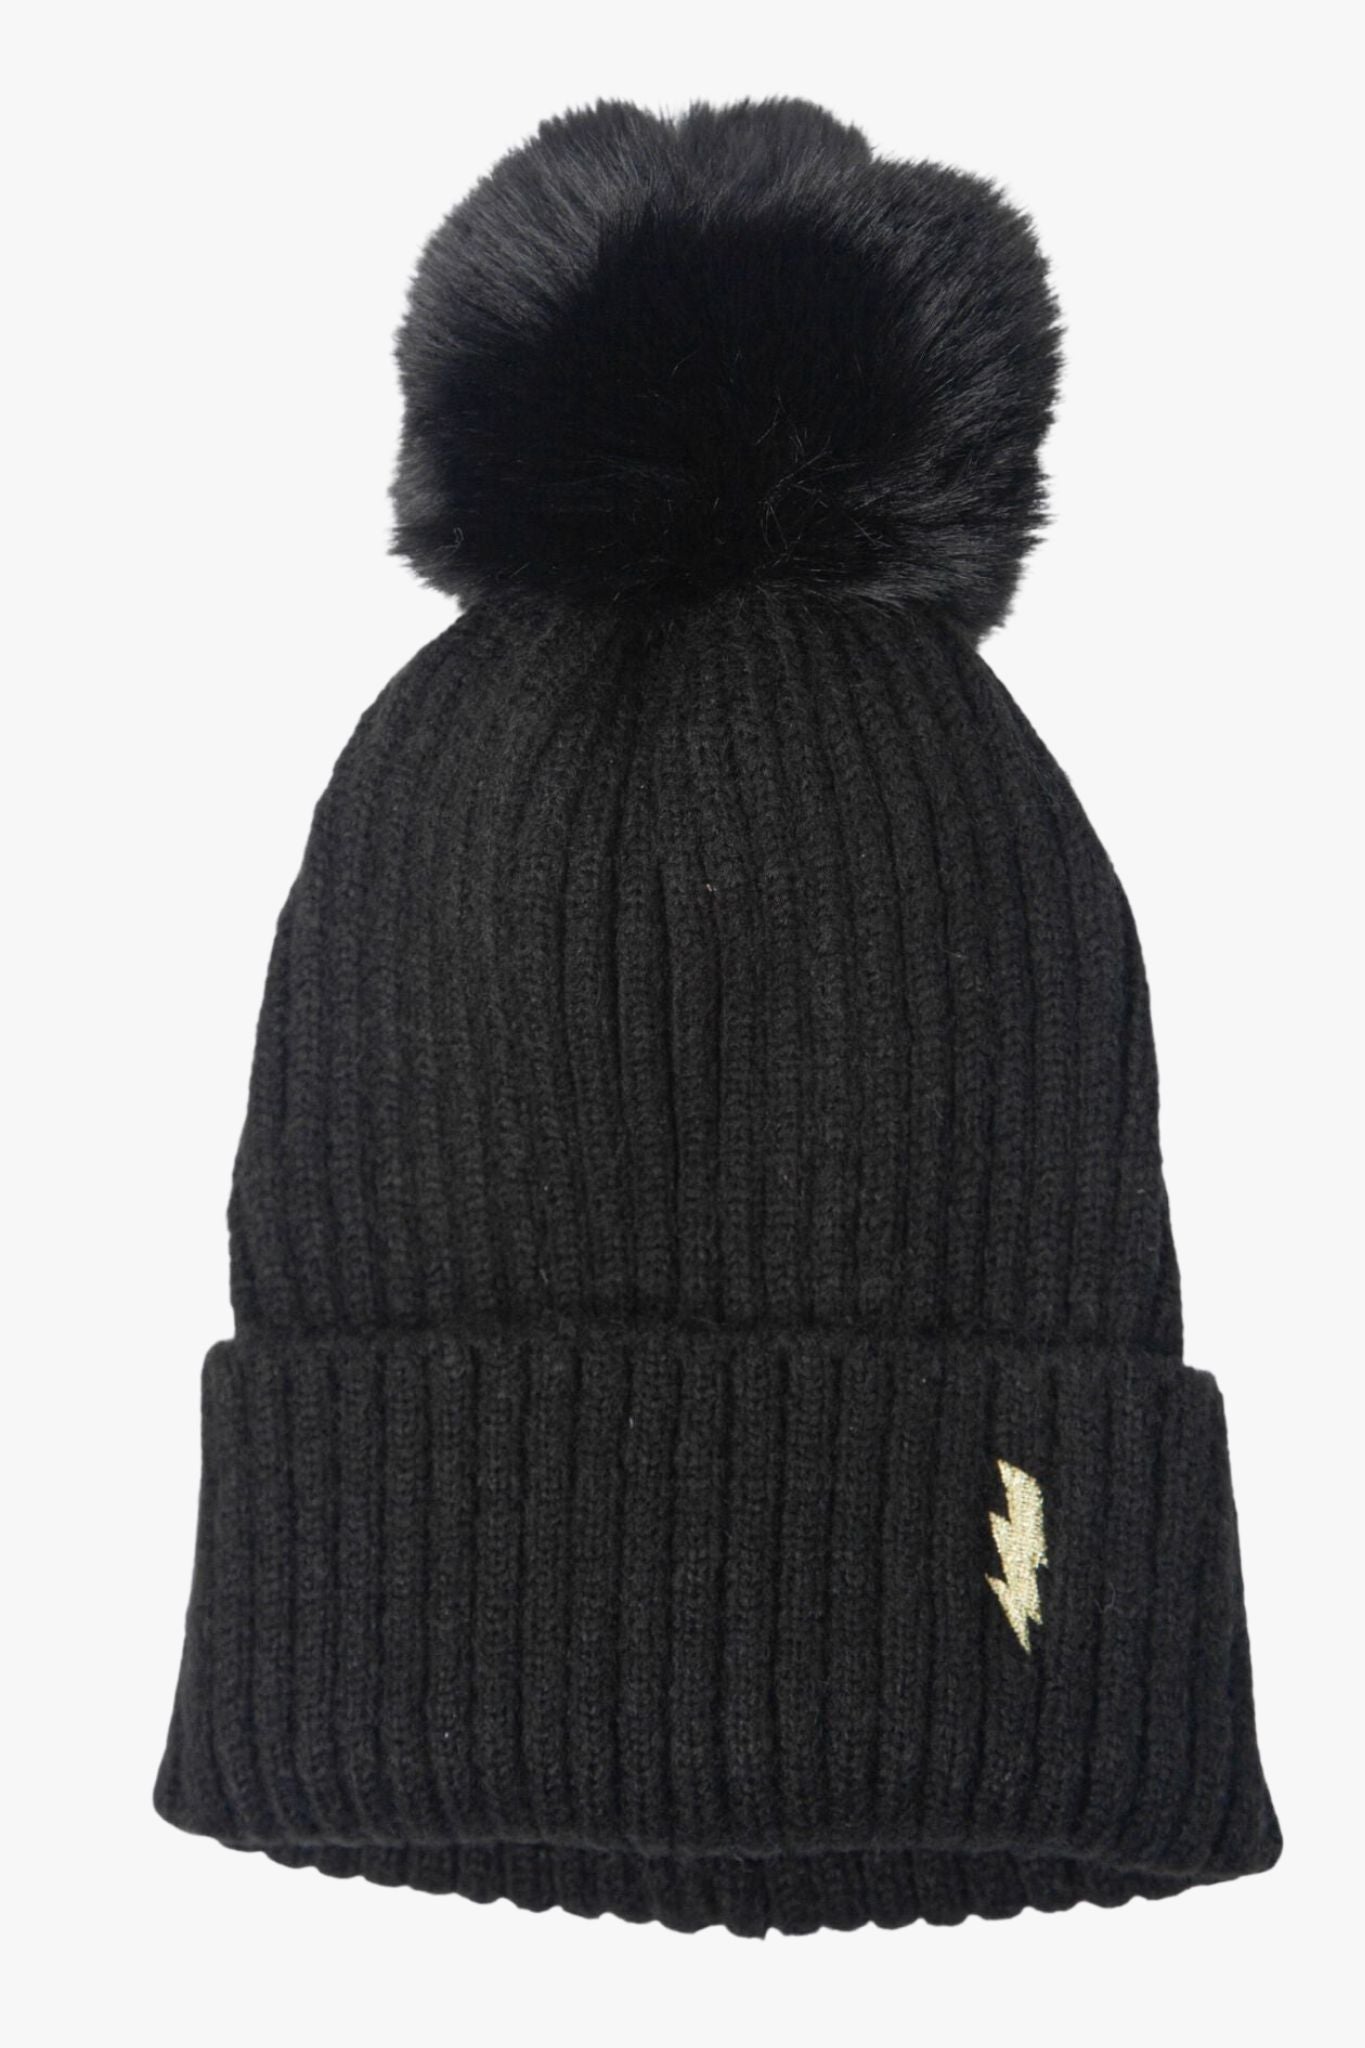 black knitted beanie hat with pom pom and a gold embroidered lighting bolt